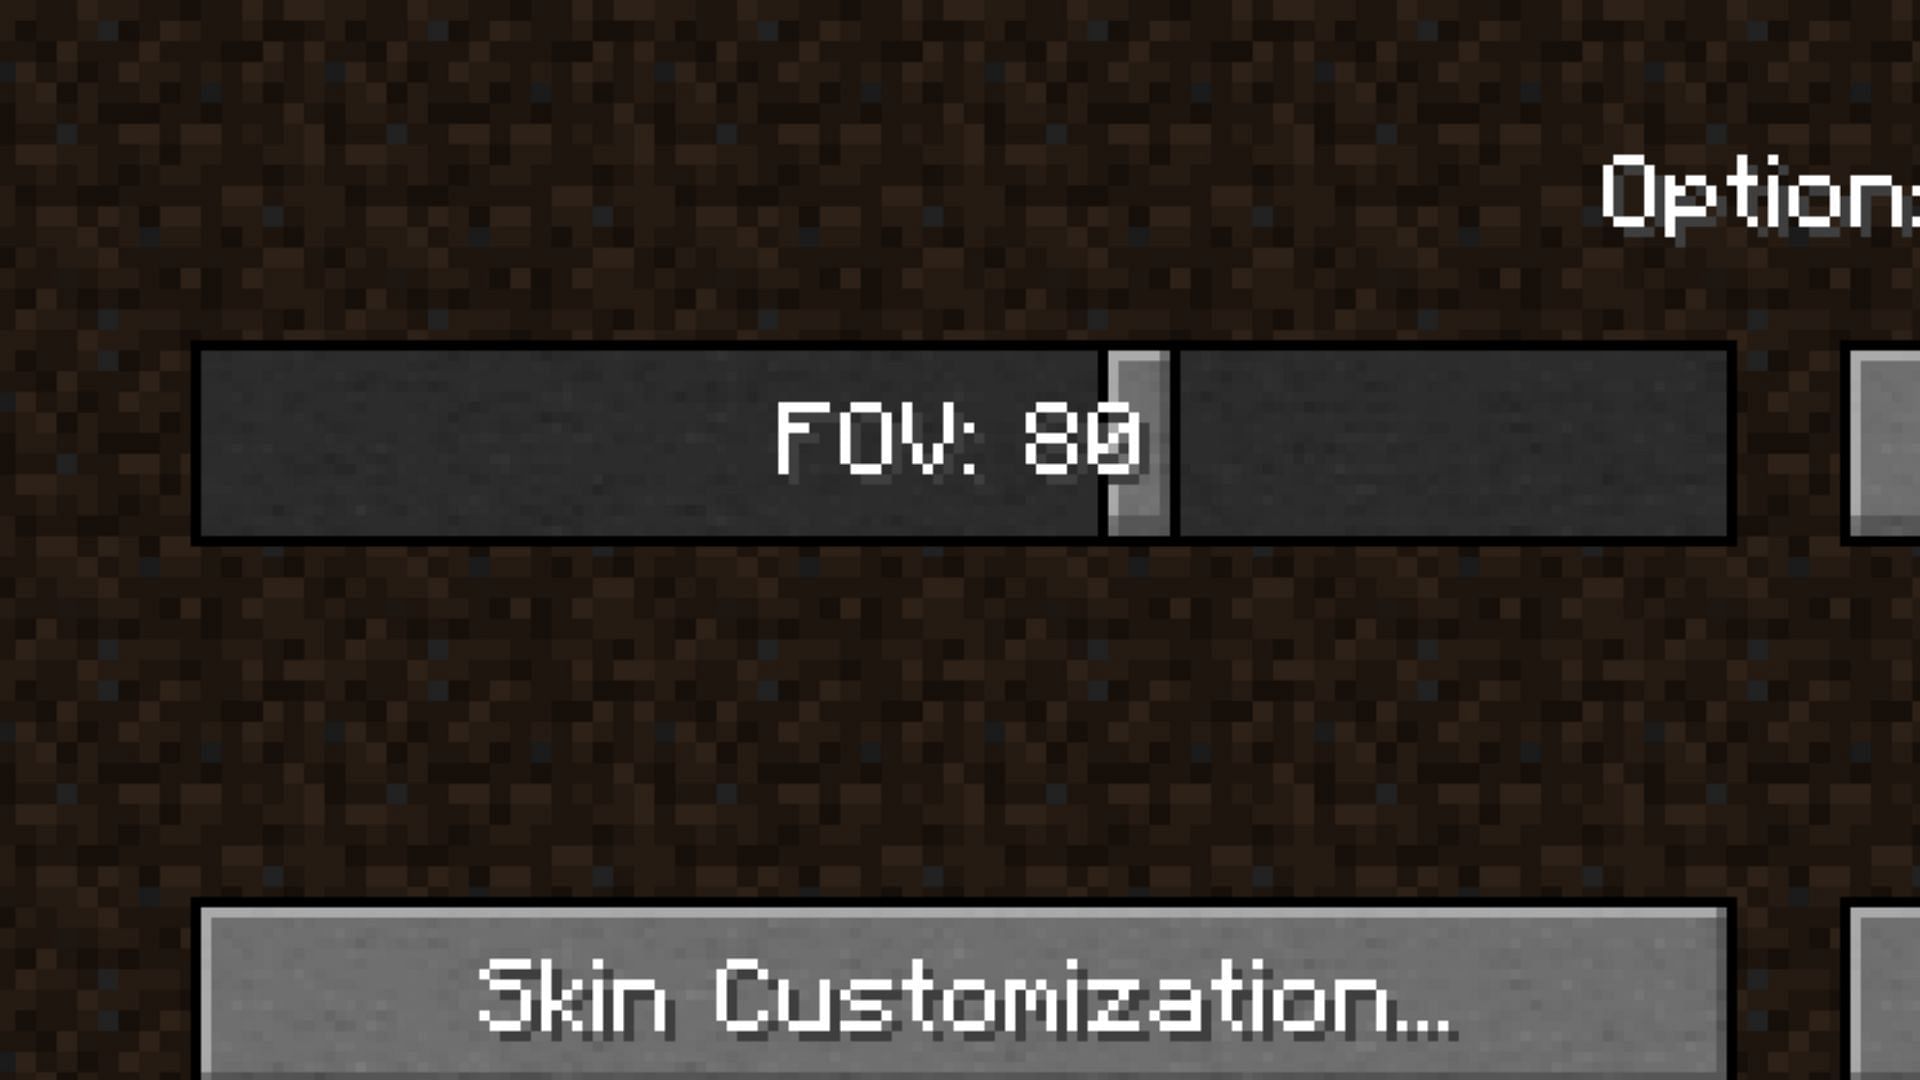 FOV can be set to 80 for the best experience in Minecraft 1.19 (Image via Mojang)